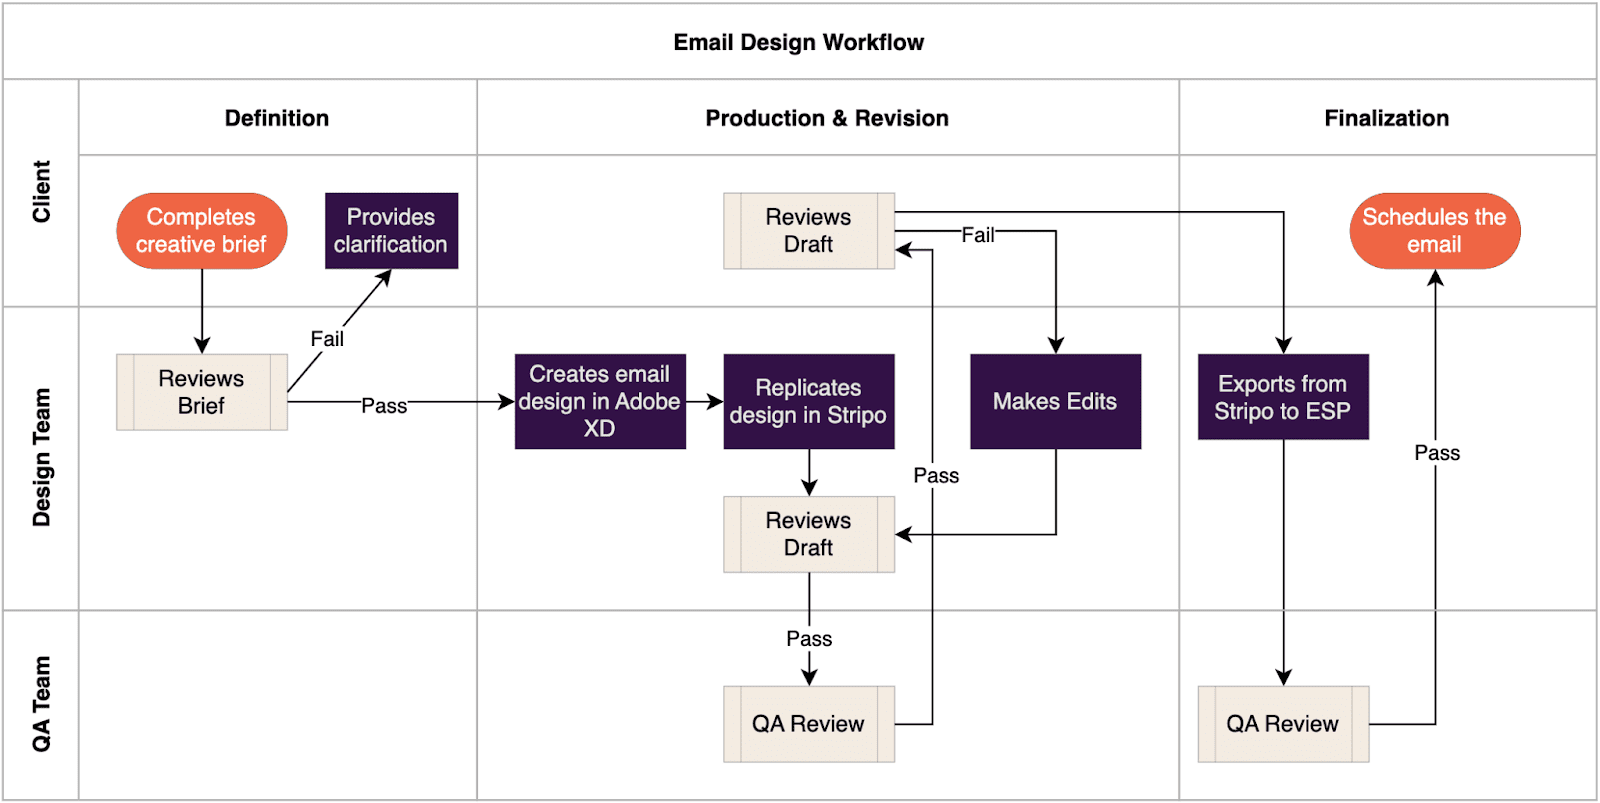 Example email design workflow